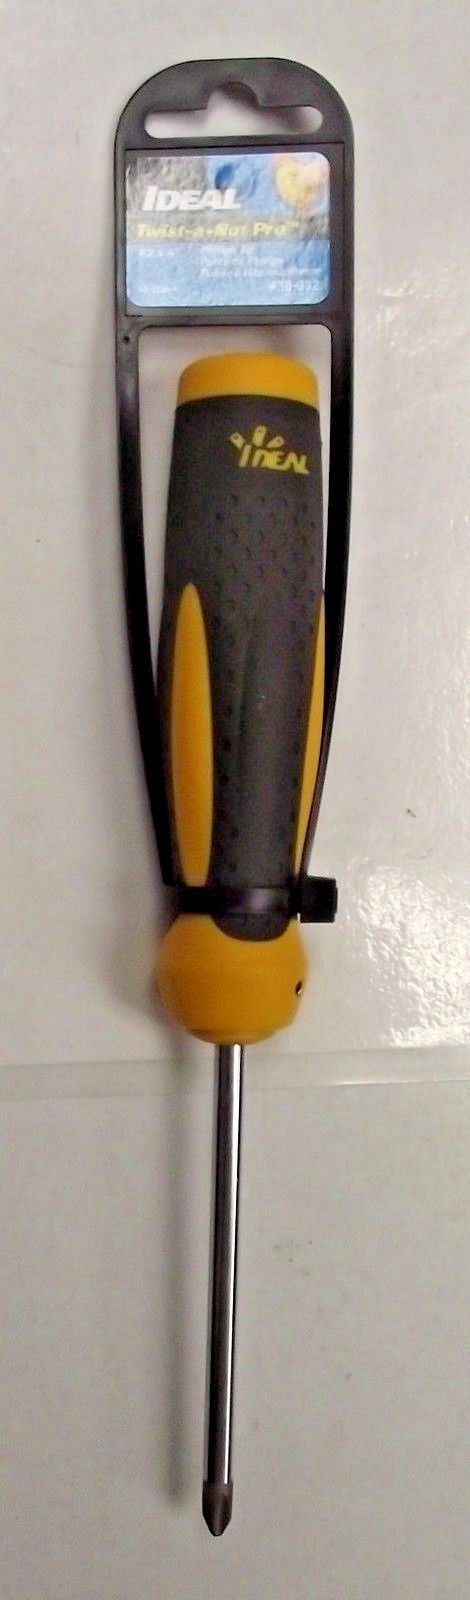 Ideal 30-332  Twist-a-Nut Pro #2 x 4" Phillips Screwdriver Carded